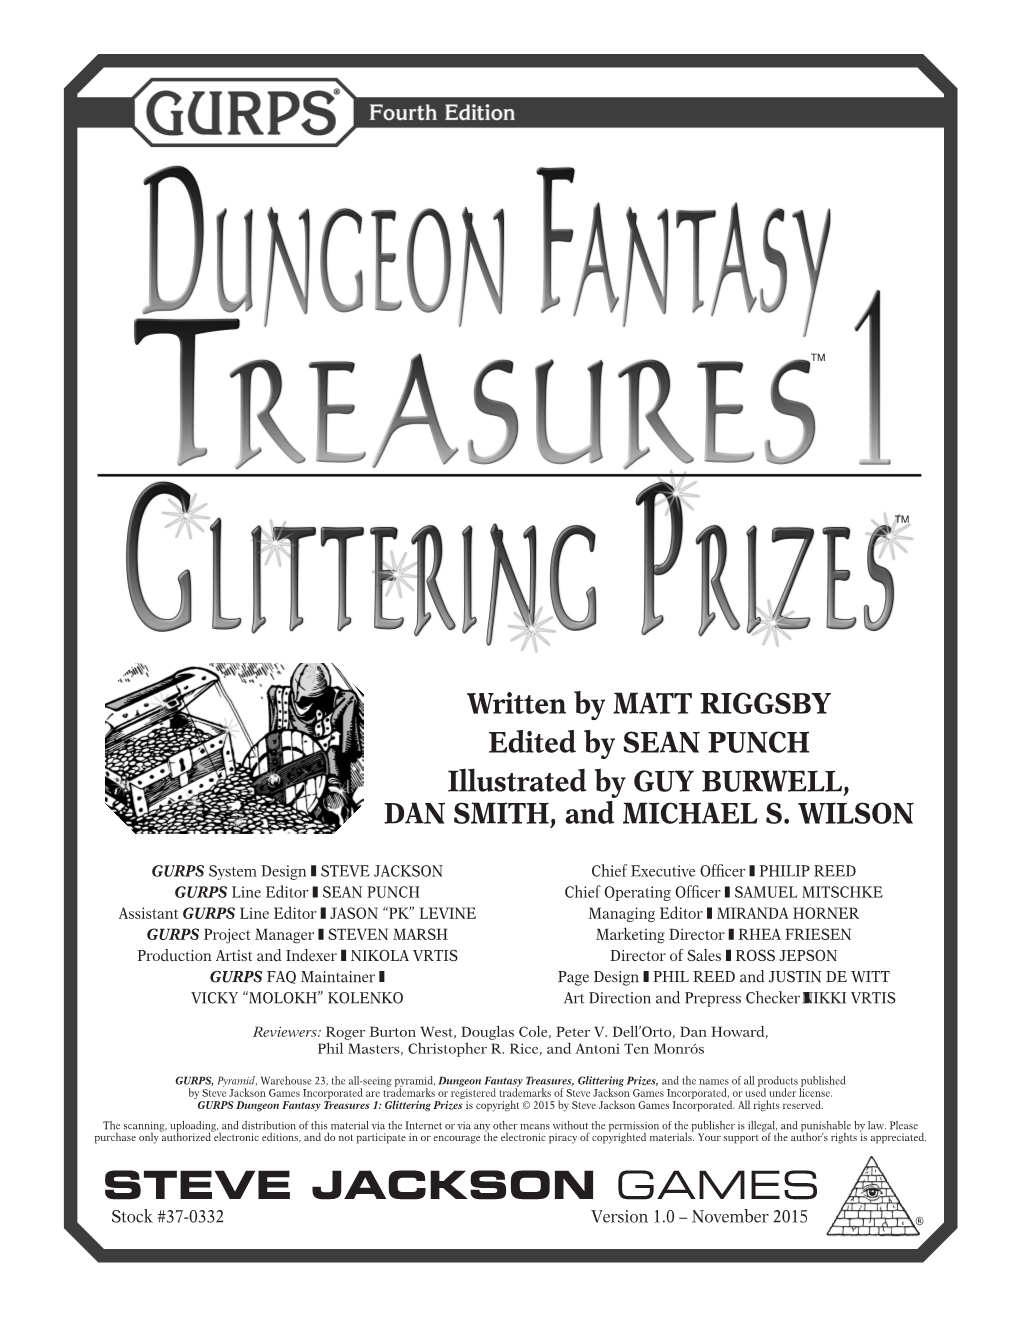 GURPS Dungeon Fantasy Treasures 1: Glittering Prizes Is Copyright © 2015 by Steve Jackson Games Incorporated